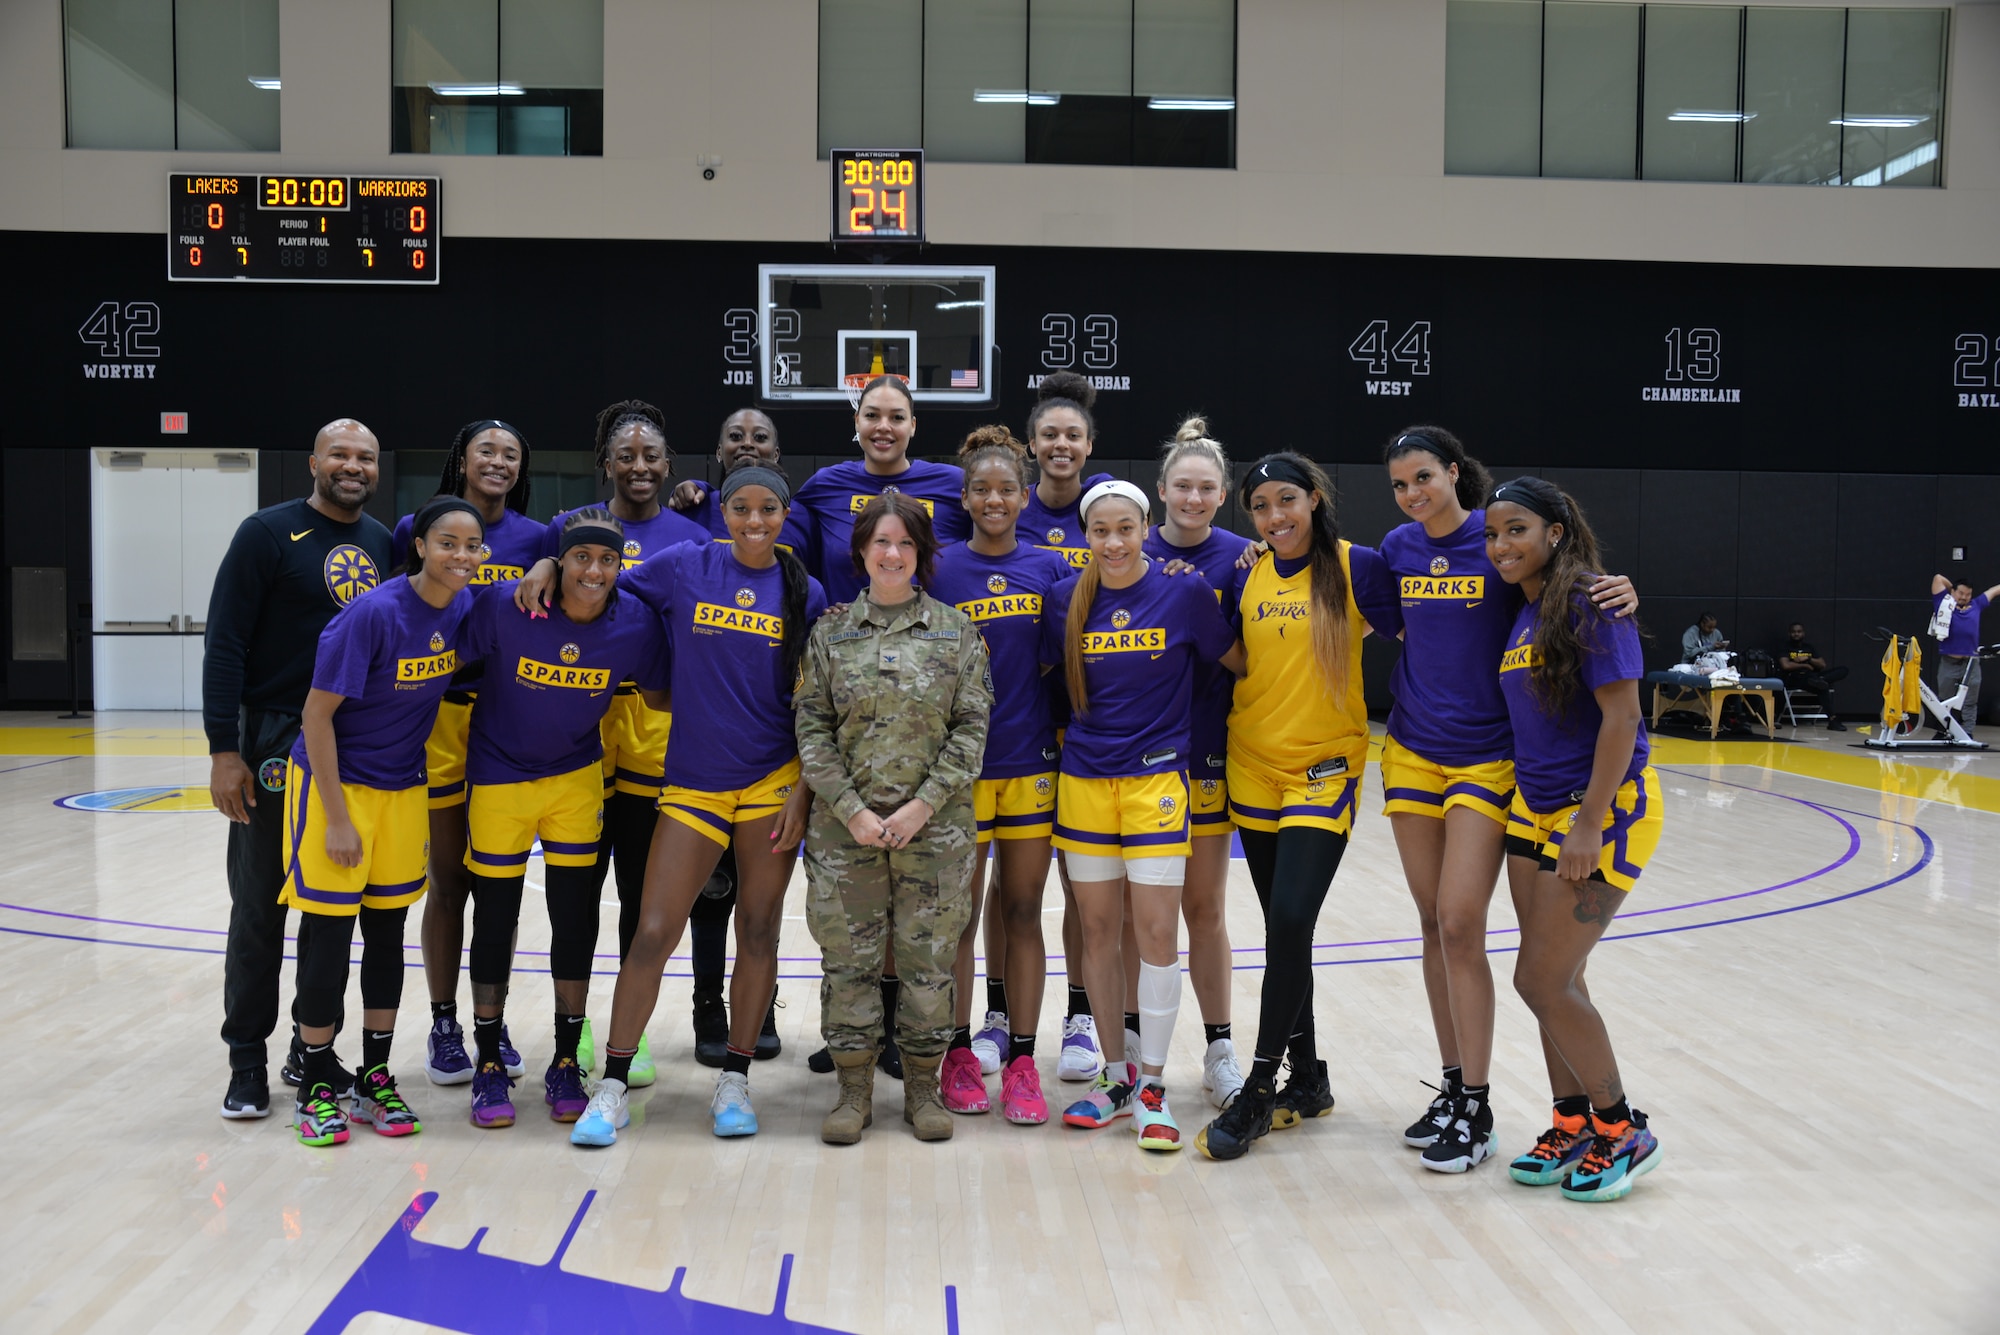 Col. Jennifer M. Krolikowski, center, joins L.A. Sparks team members and head coach Derek Fisher following her recent motivational talk about leadership and personal and professional challenges.